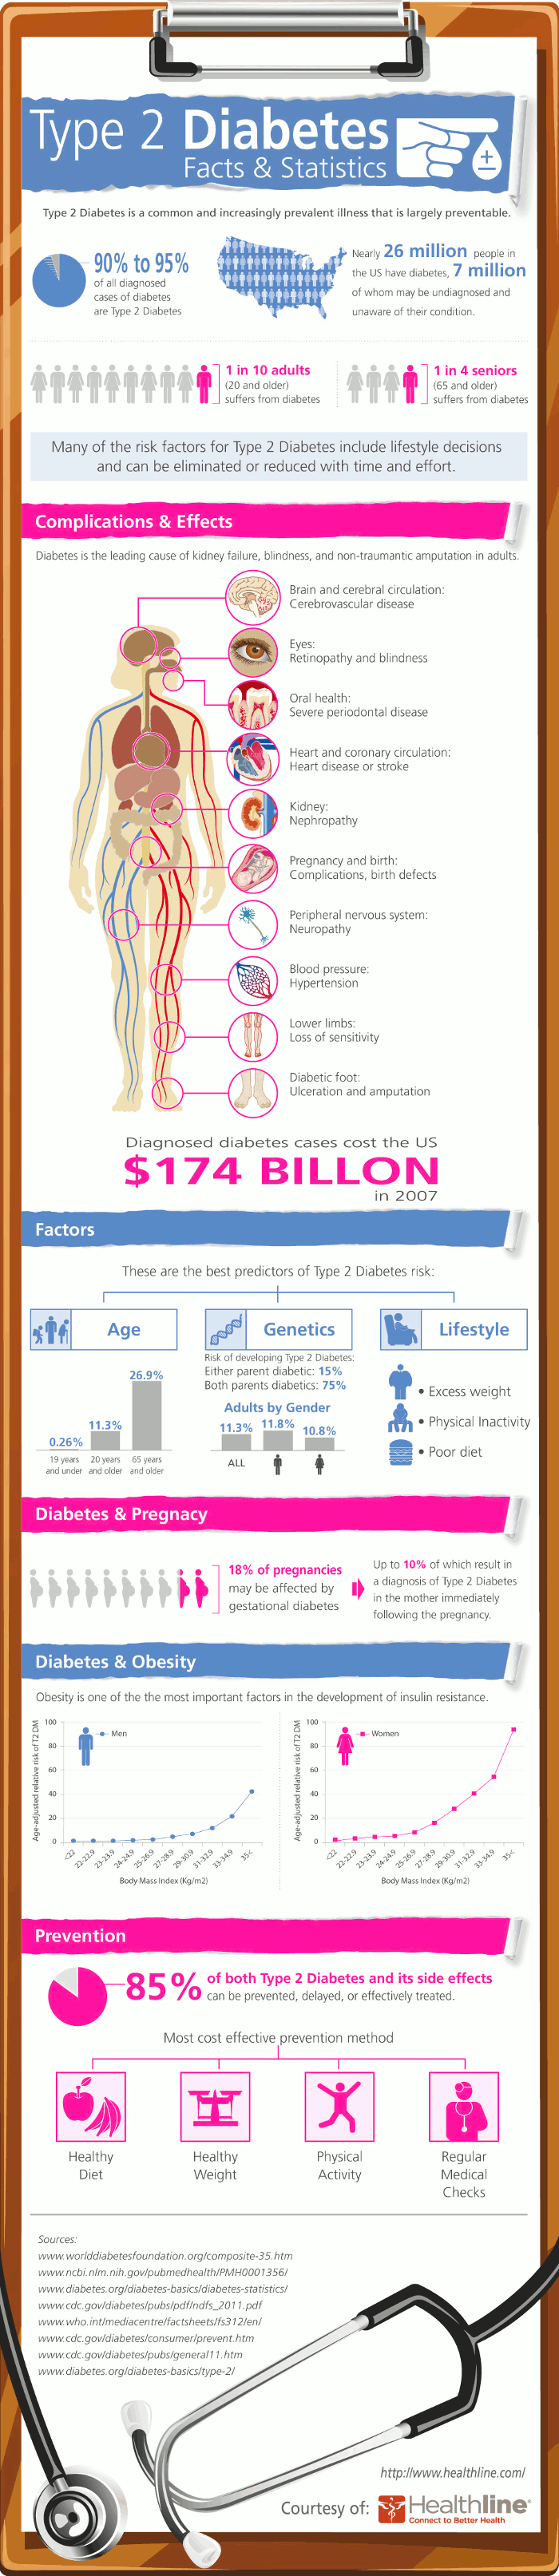 Type 2 Diabetes Facts And Statistics